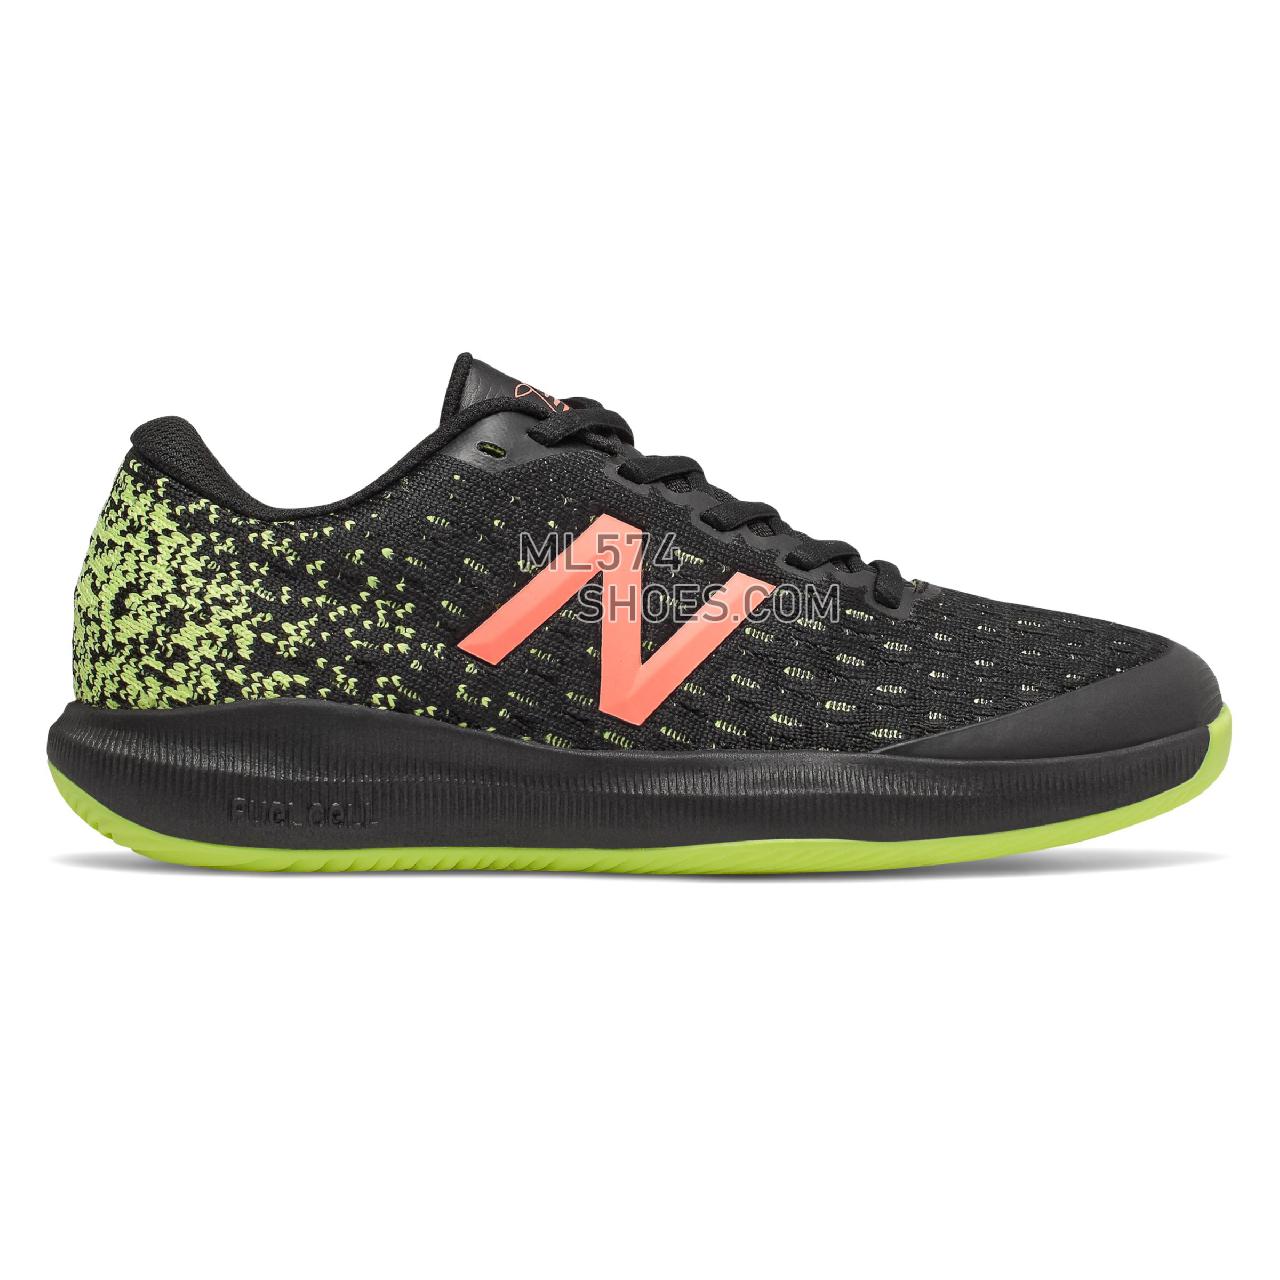 New Balance FuelCell 996v4 - Women's Tennis - Black with Lemon Slush and Pink - WCH996M4